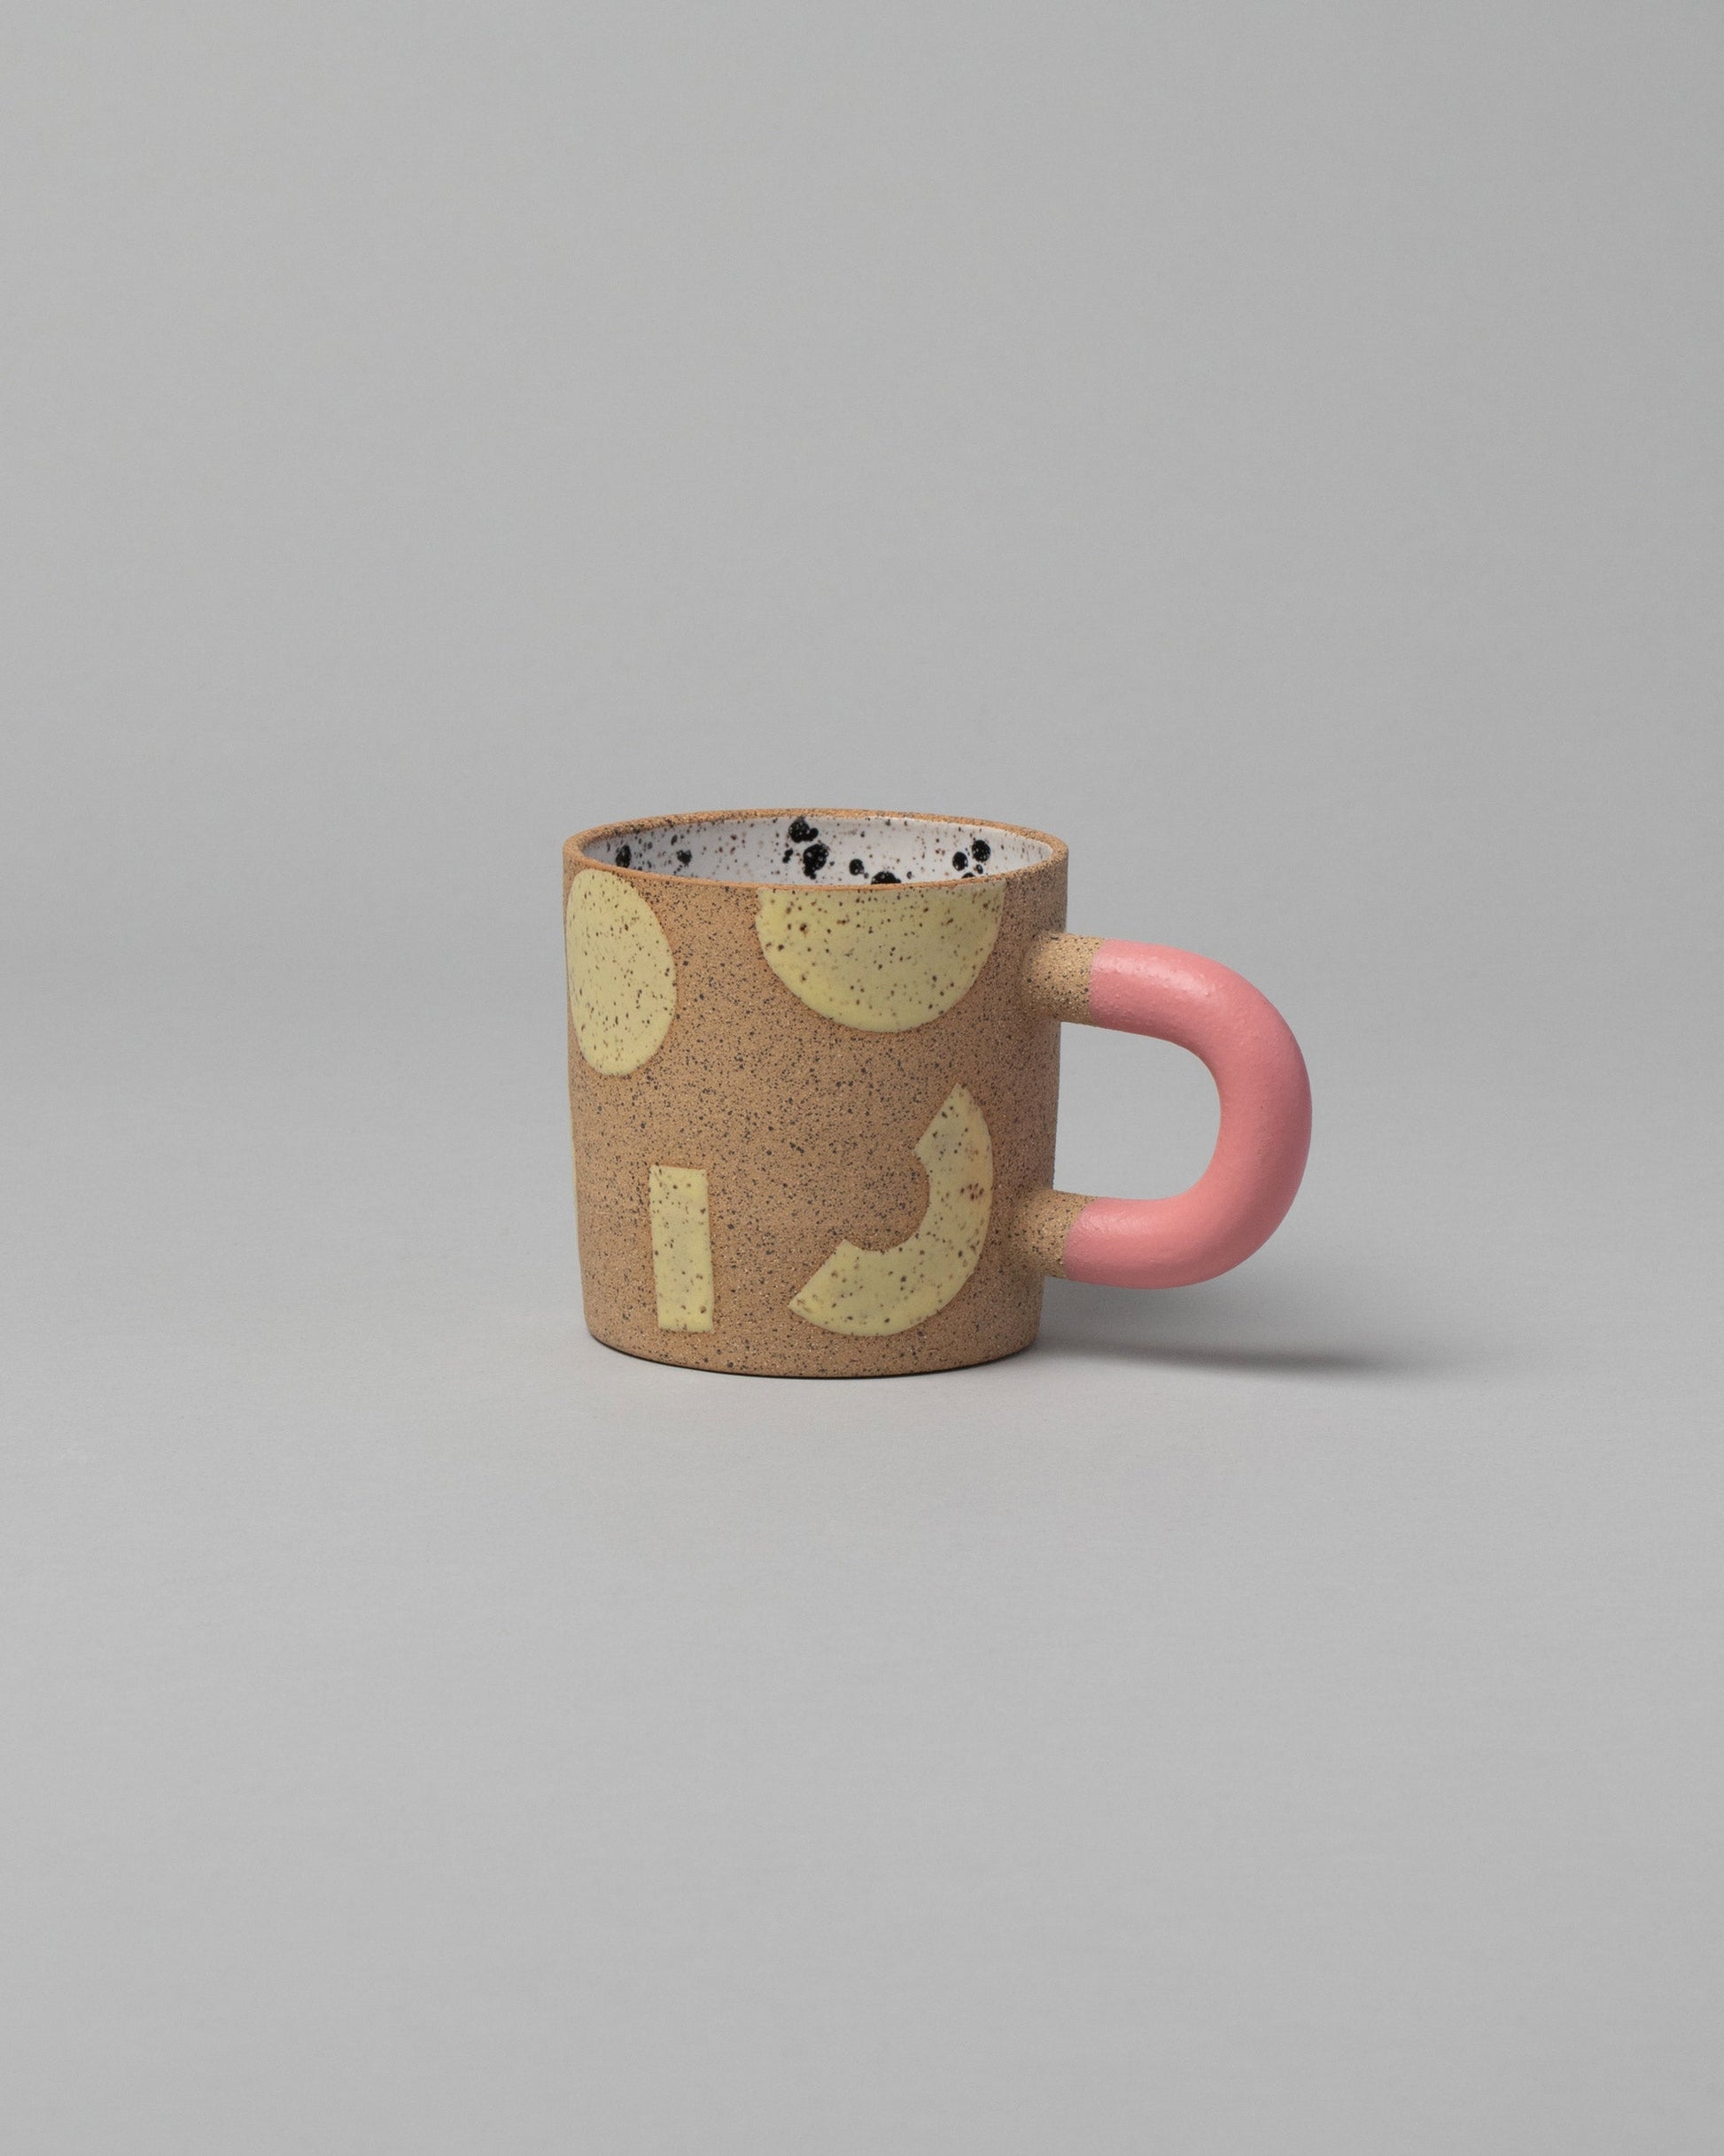  Recreation Center Yellow Shapes & Pink Handle Shapes Mug on light color background.